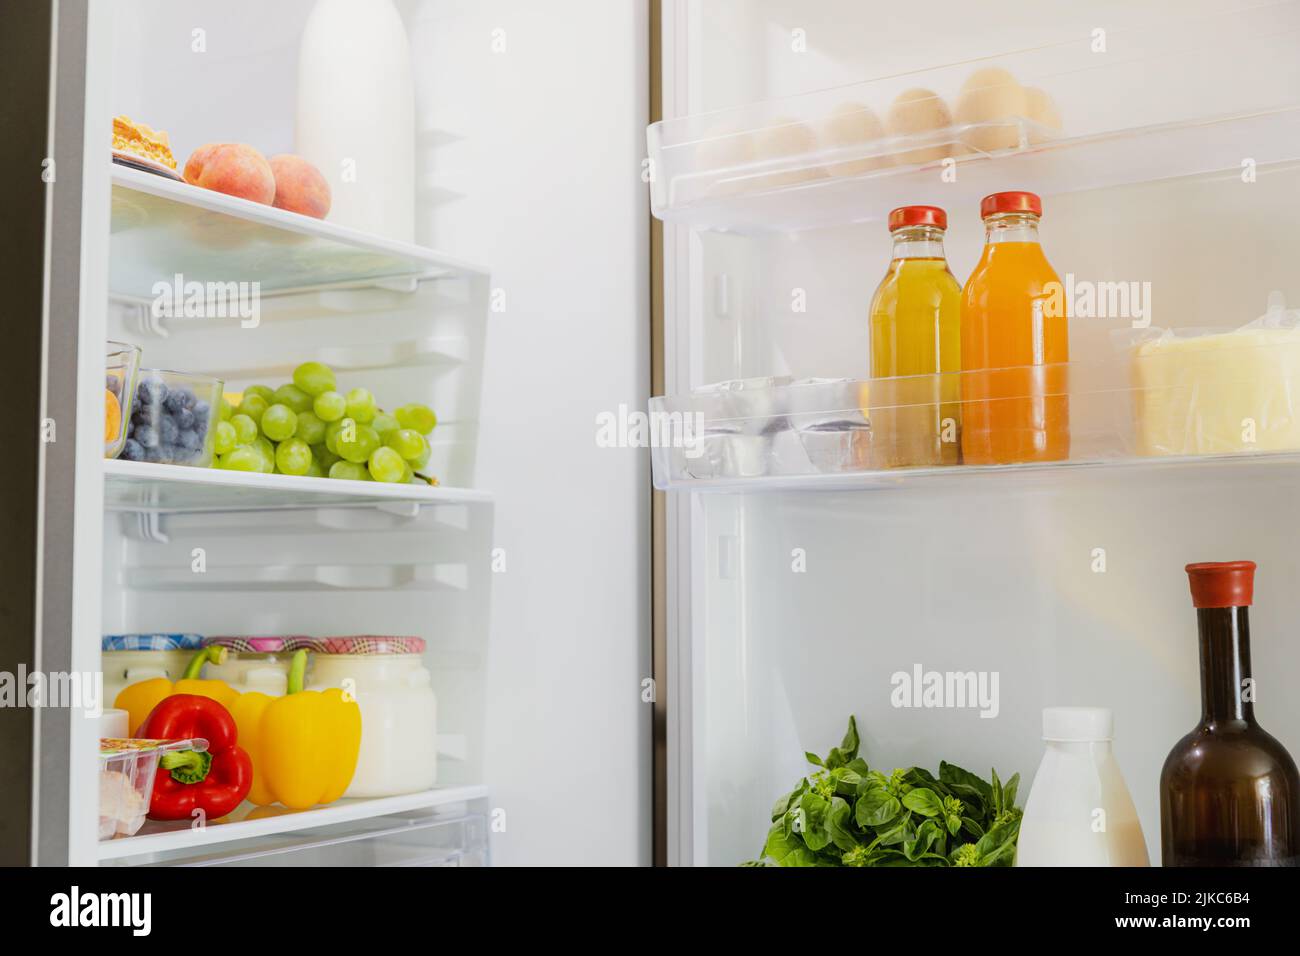 Front View of open two door fridge or refrigerator door filled with fresh fruits and vegetables, full of healthy food items and ingredients inside. Electric Kitchen and Domestic Major Appliances Stock Photo